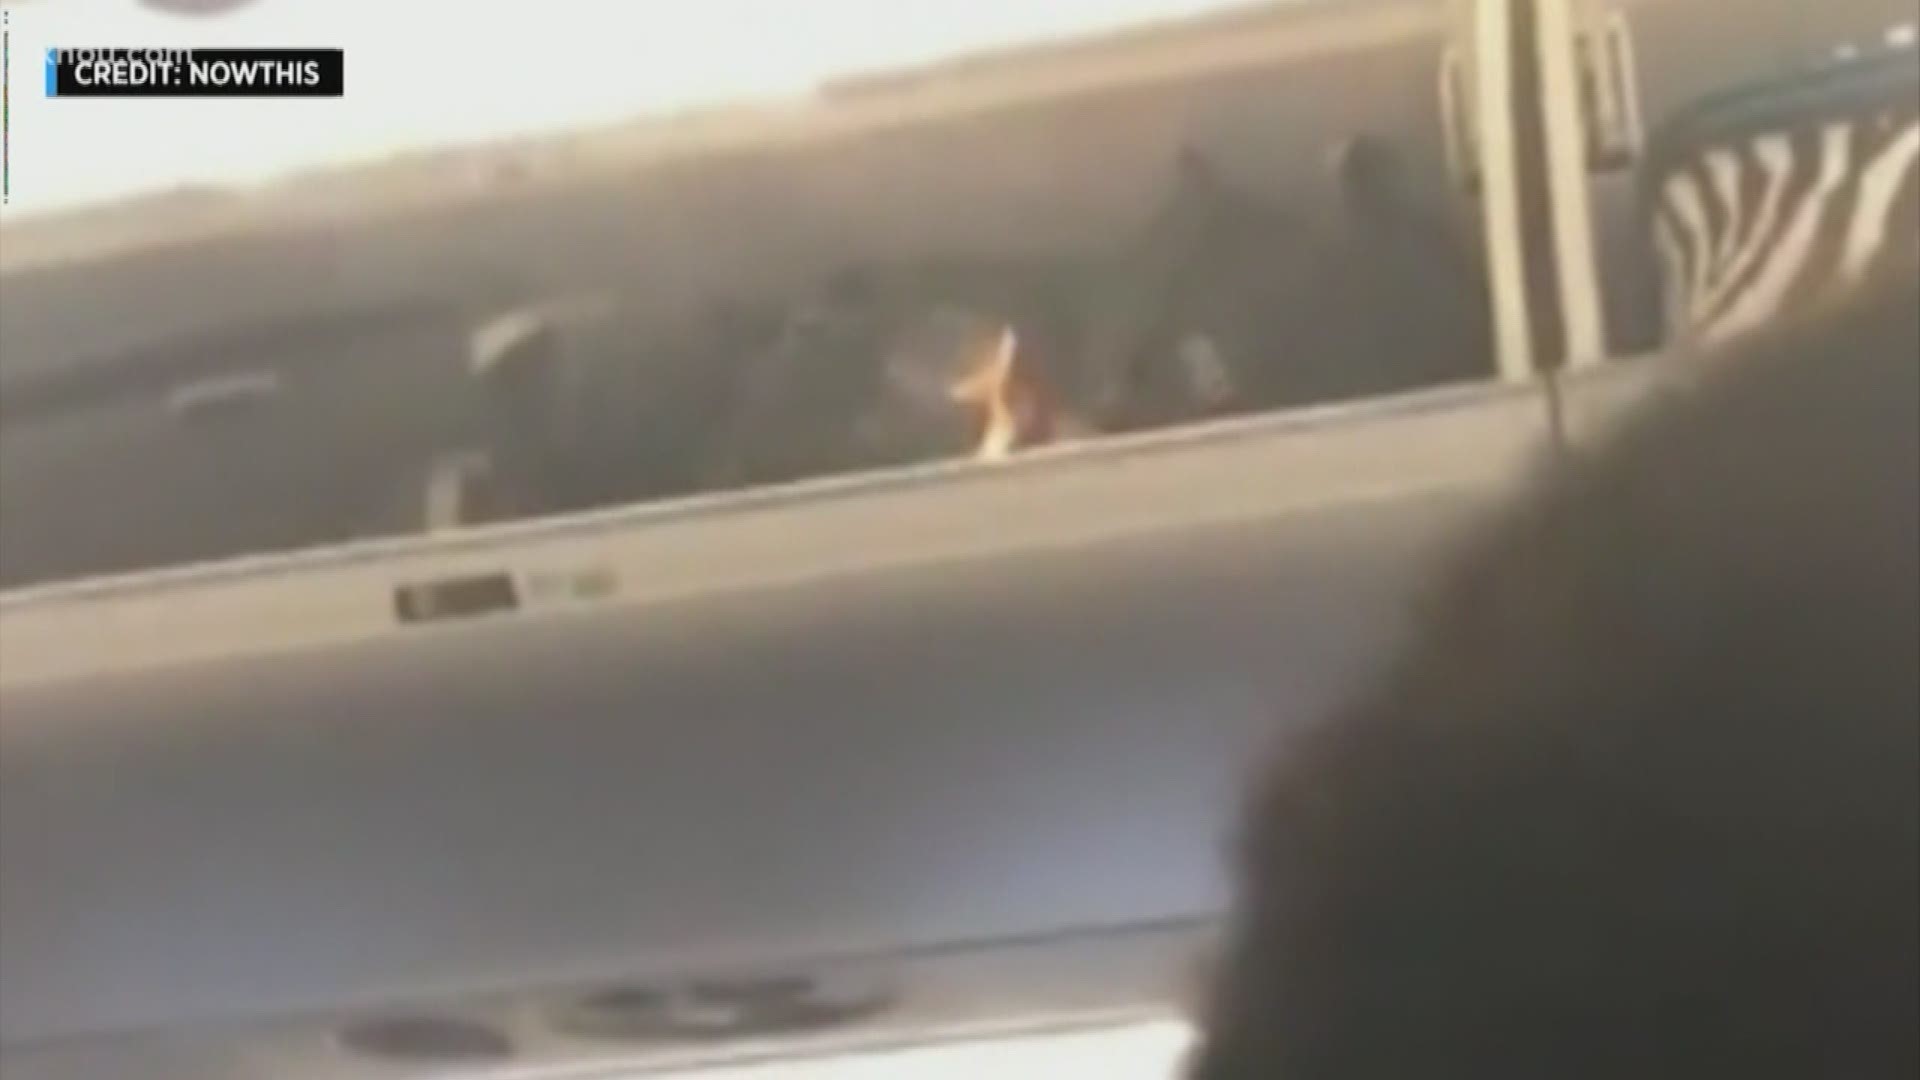 A vape pen in an overhead bin sparked a fire on a Delta flight. You can see passengers and a flight attendant rushing to put those flames. The plane was headed to Houston but still on the tarmac in New York when the fire started. Thankfully, no one was hurt.